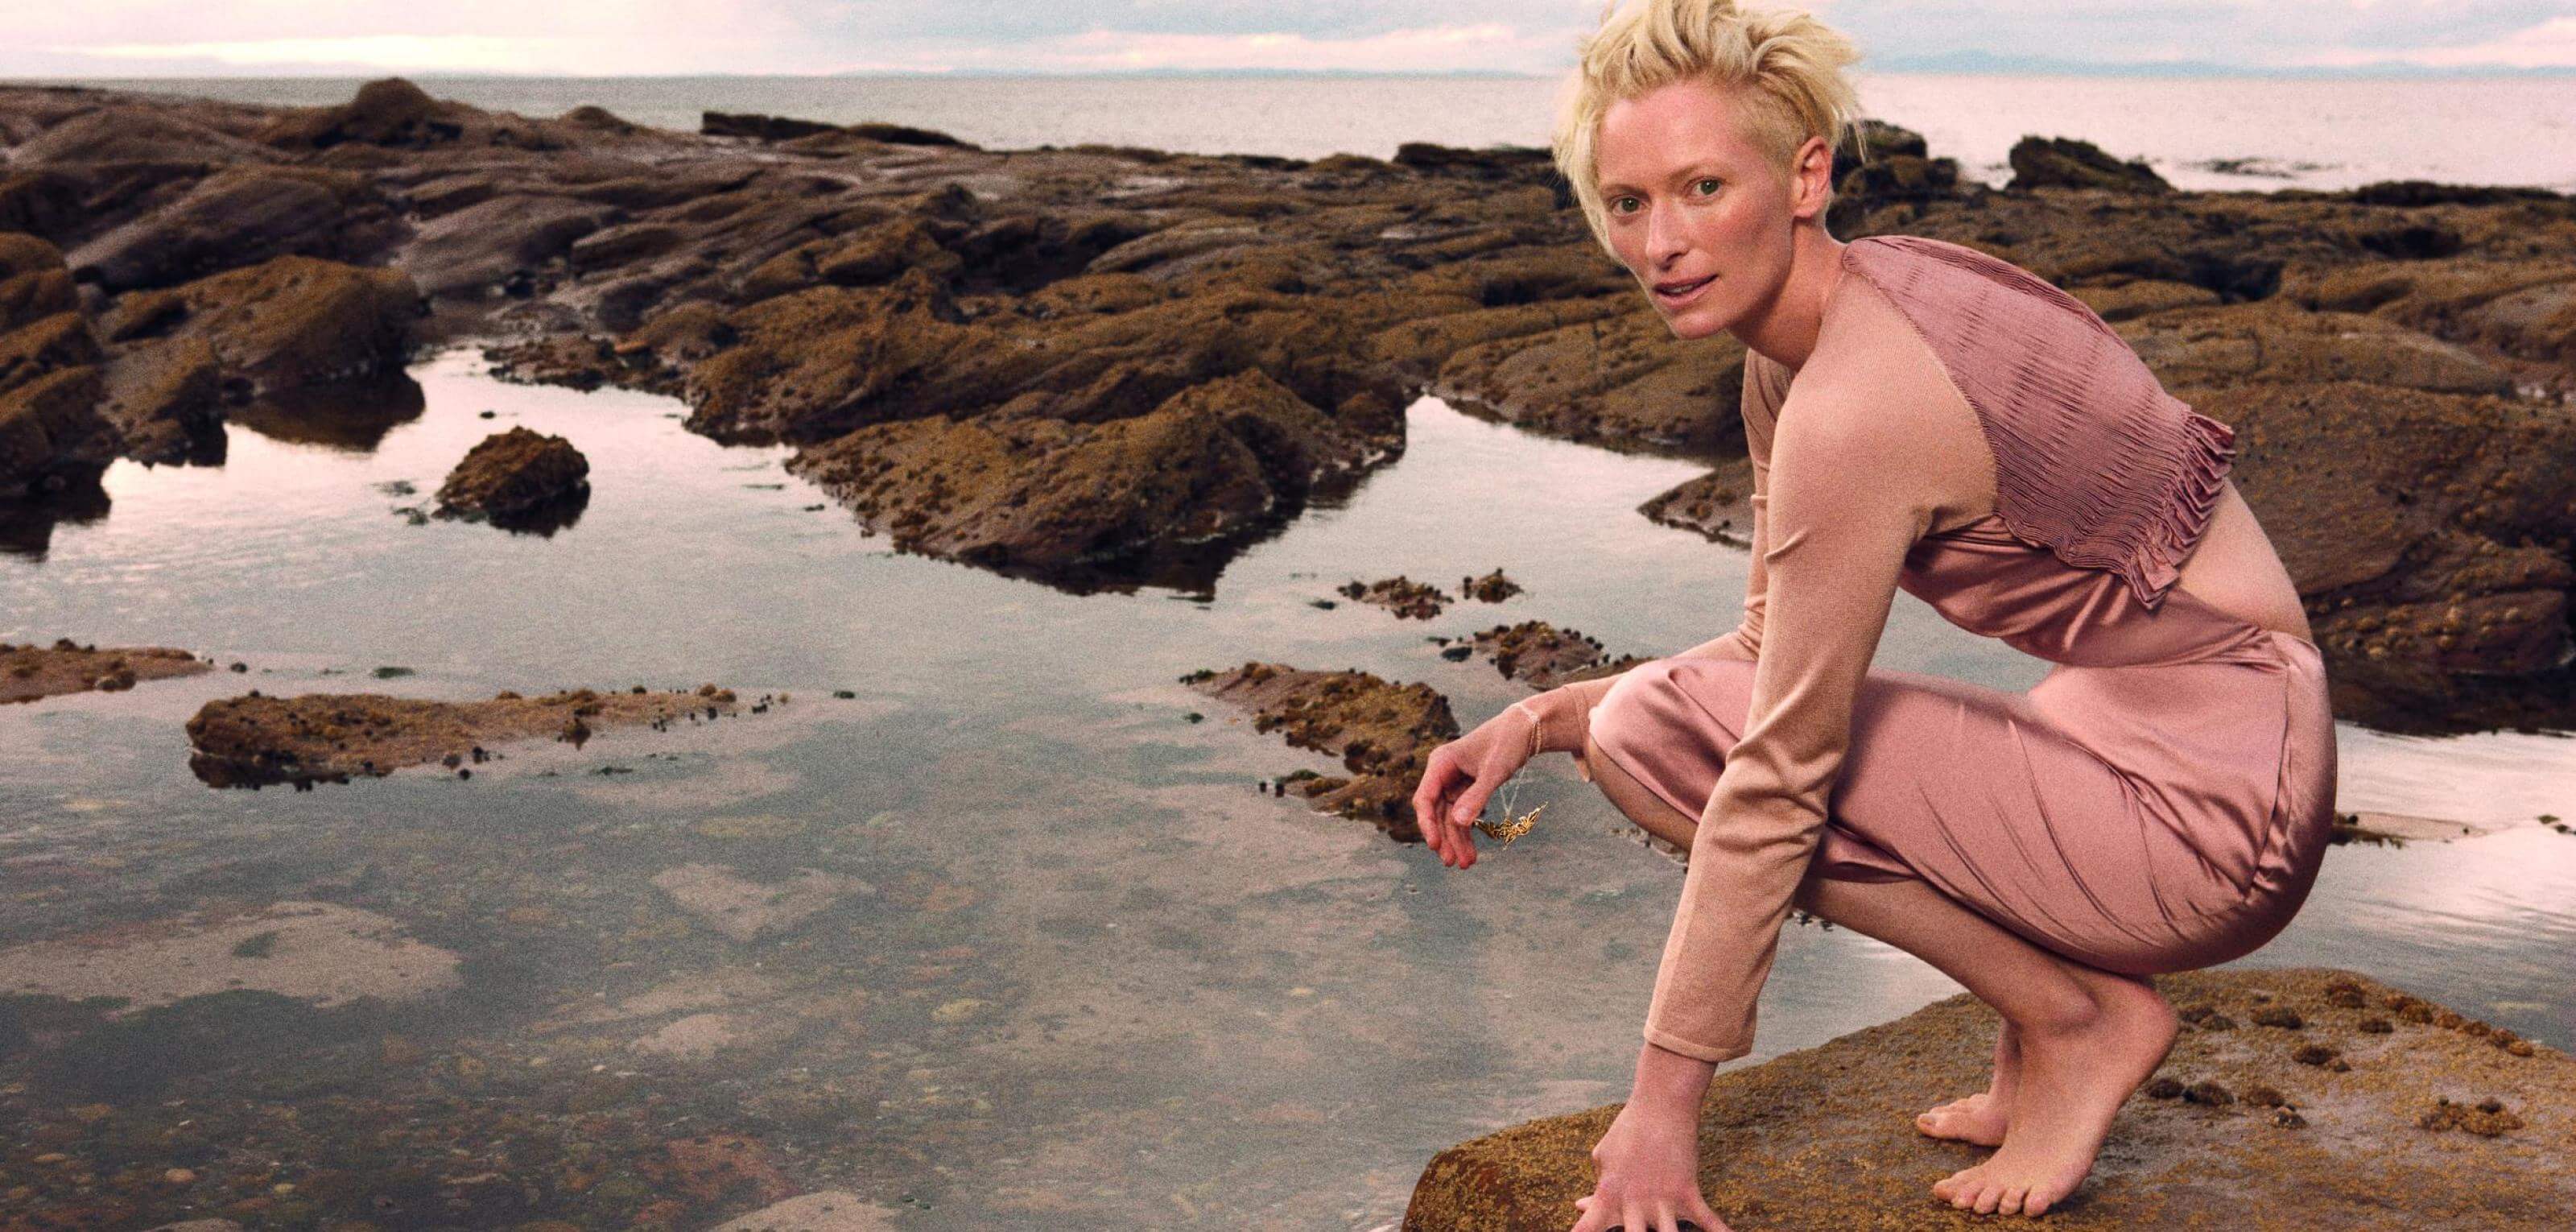 49 Hot Pictures Of Tilda Swinton Are Gift From God To Humans | Best Of Comic Books